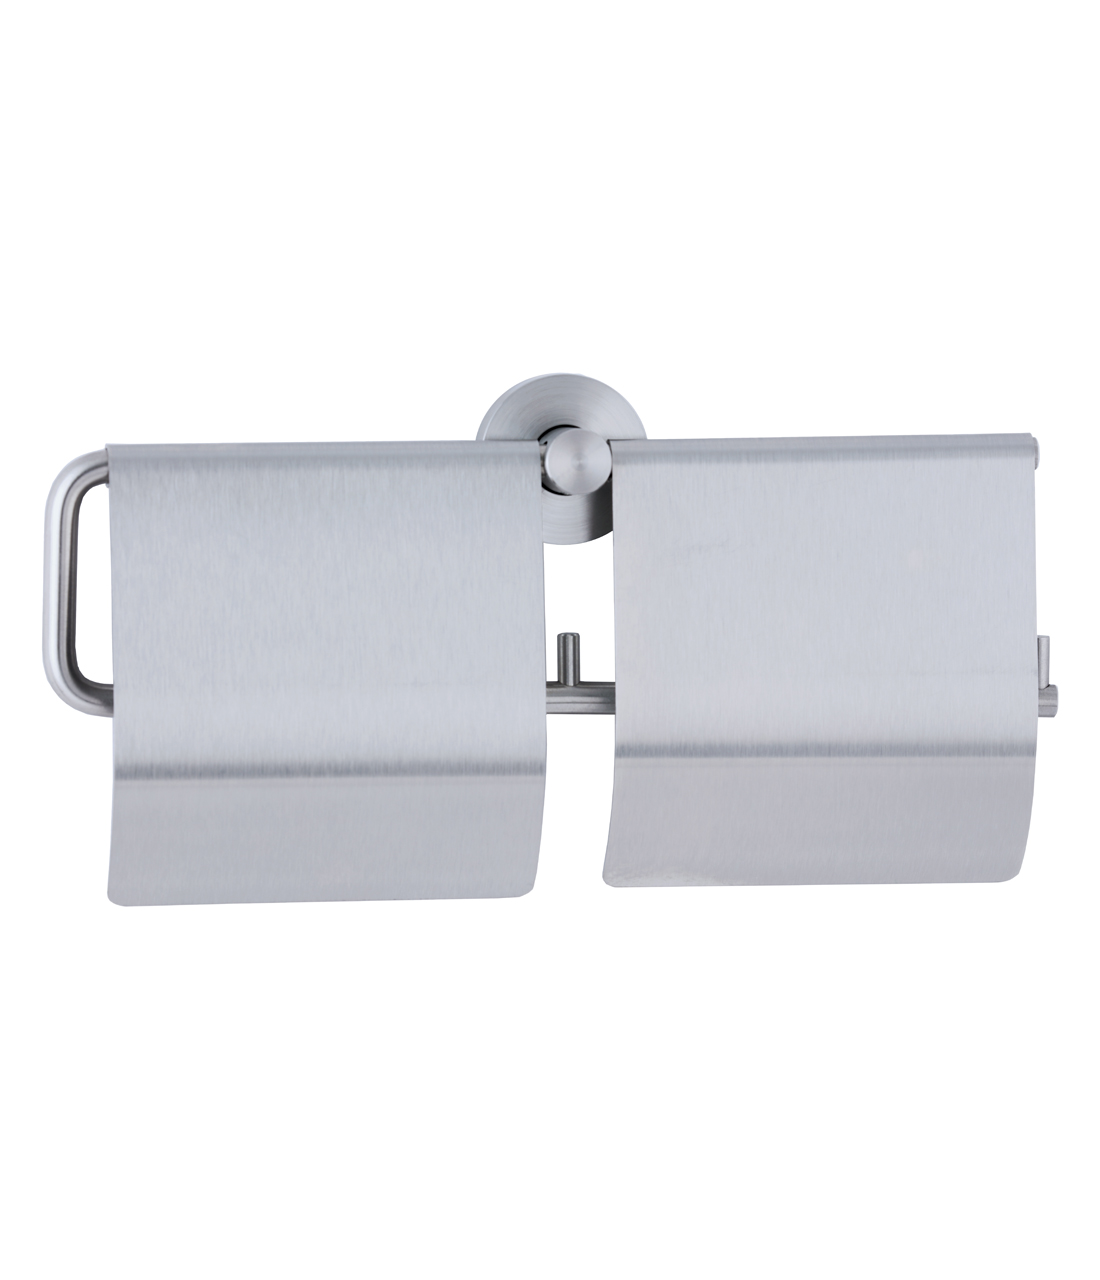 Surface-Mounted Double Roll Toilet Tissue Dispenser with Hoods Image